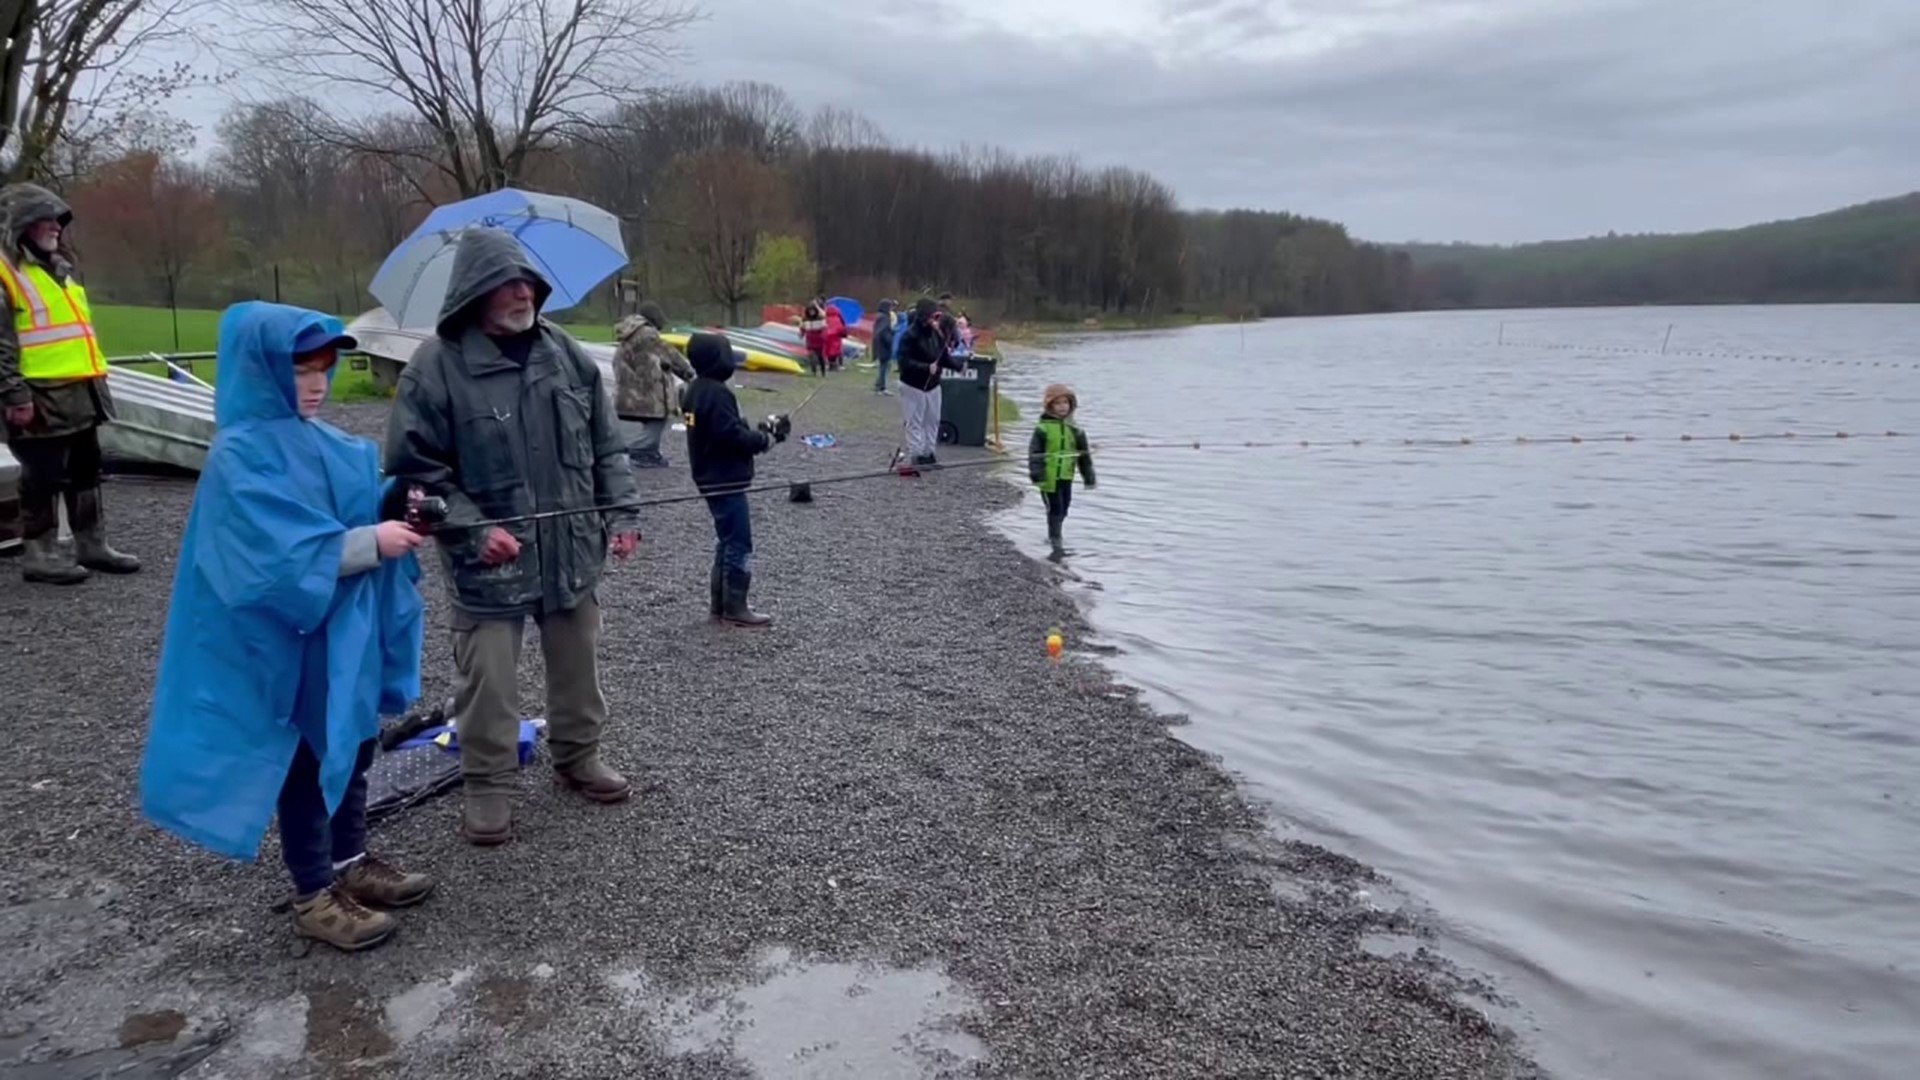 The rainy weather was not ideal for some, but for others in Luzerne County, they embraced it.